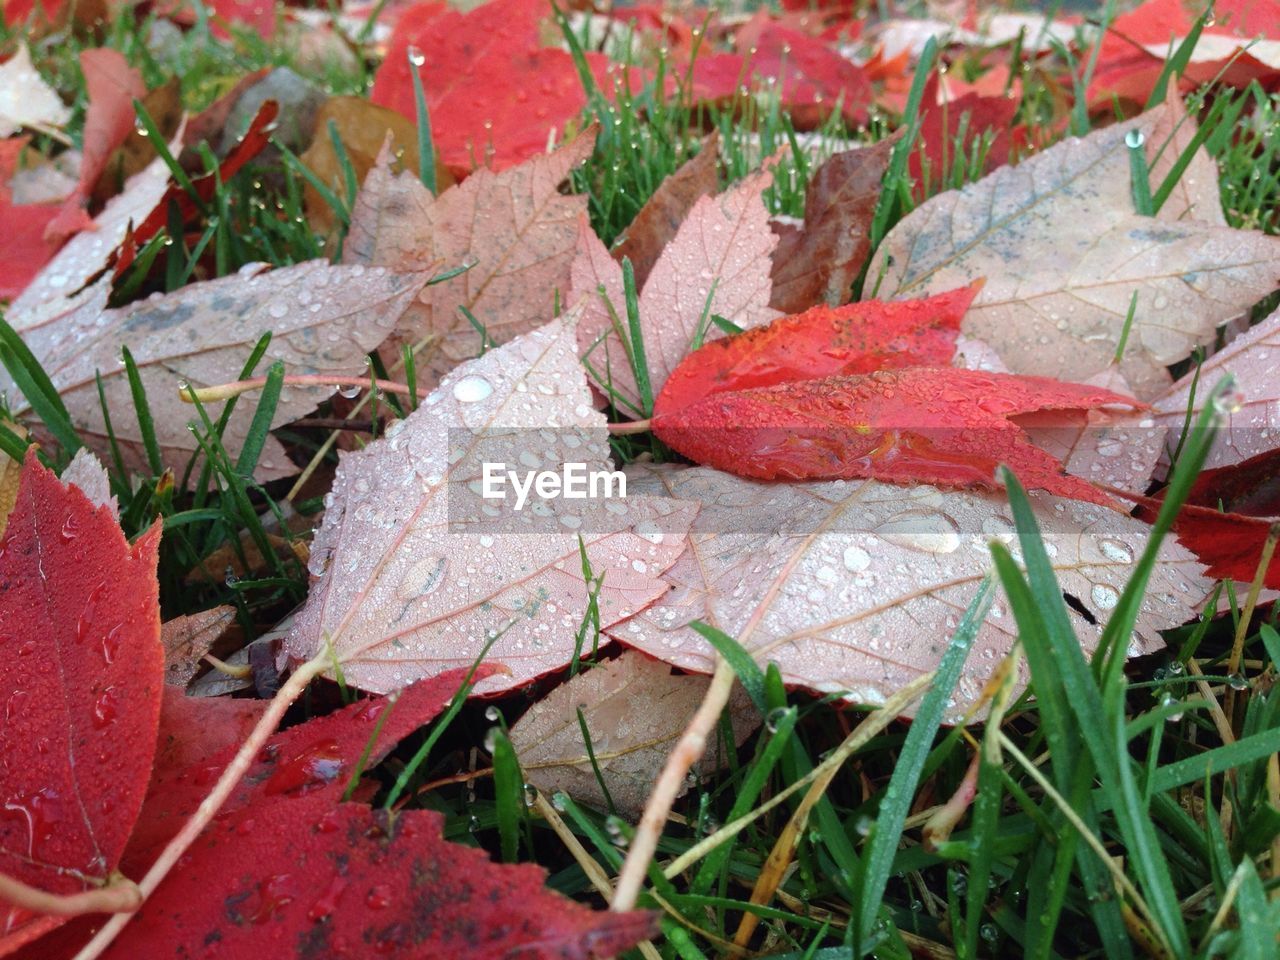 Wet red leaves on grass